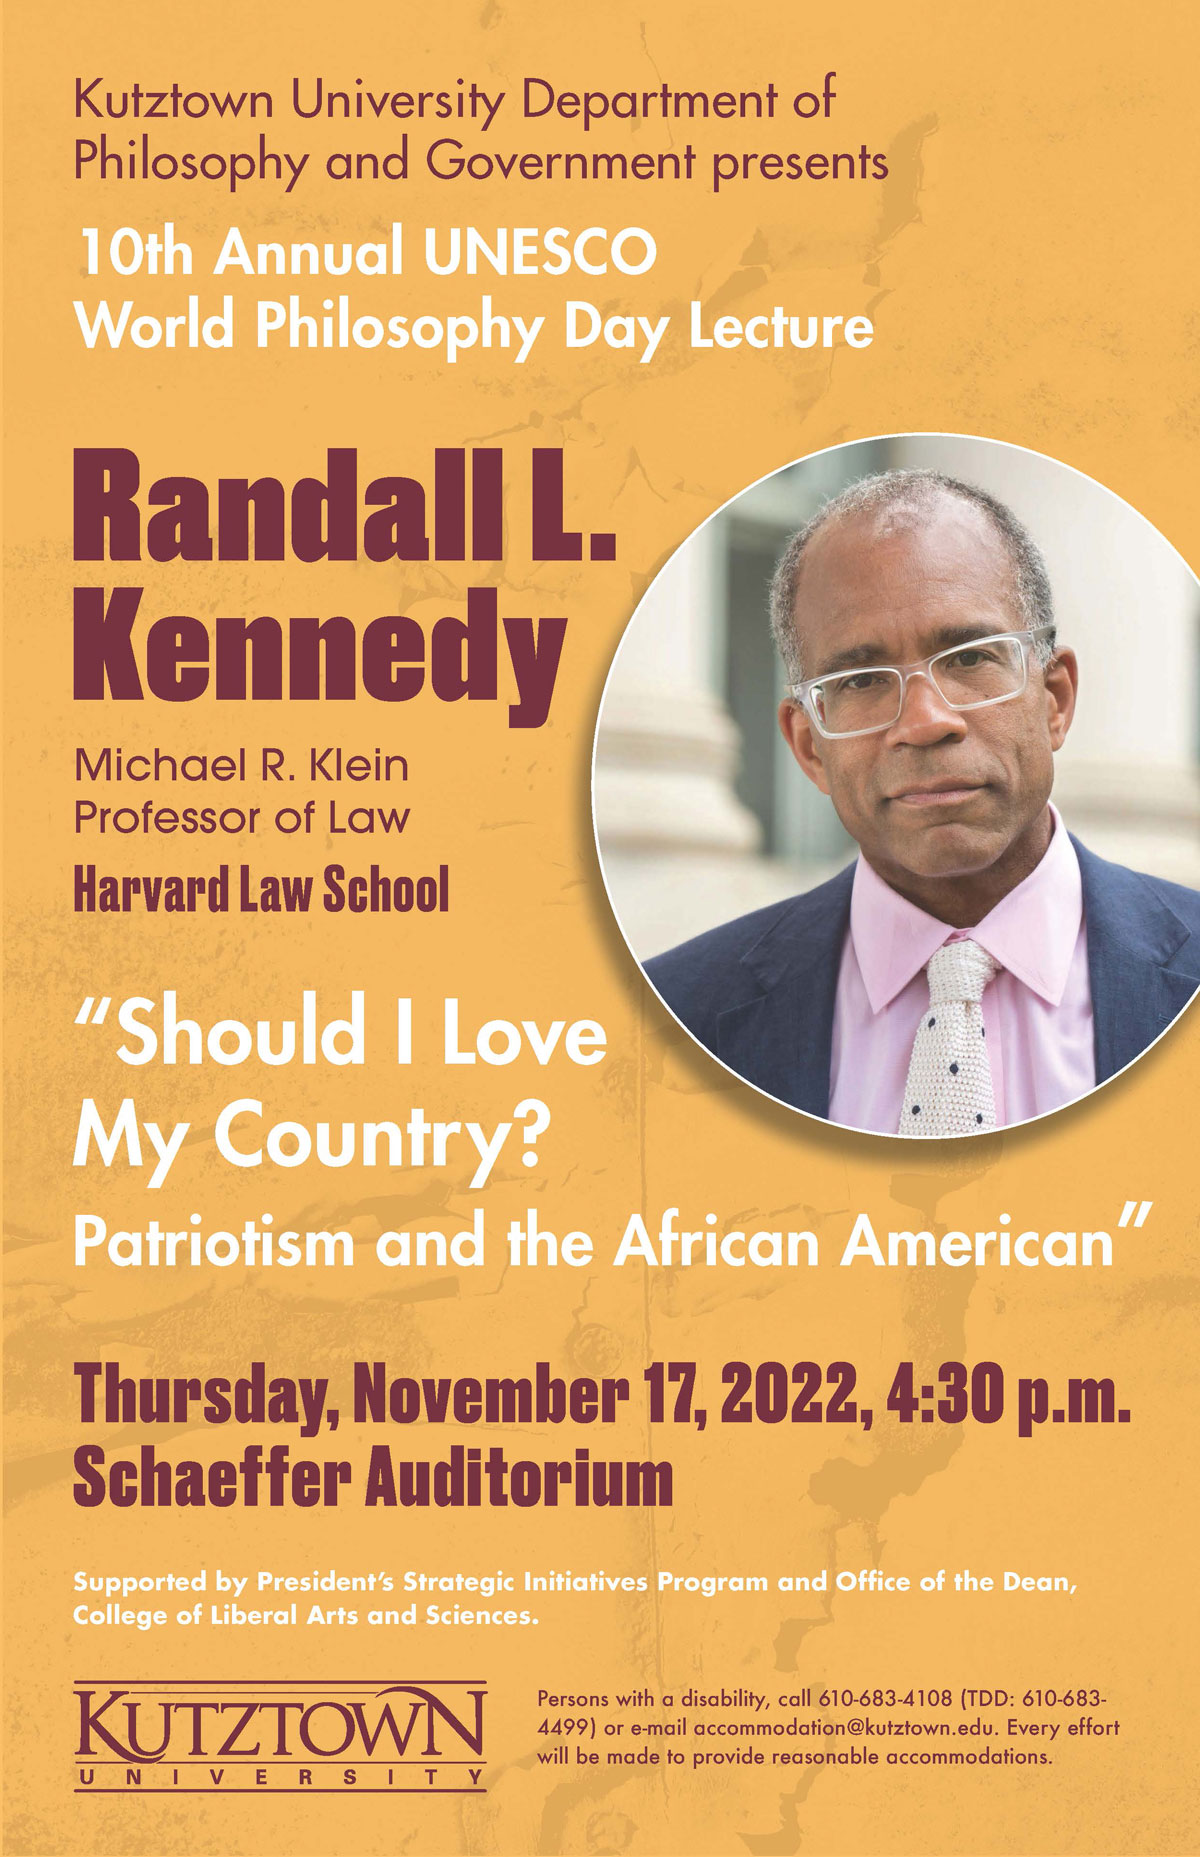 Poster of 10th Annual UNESCO World Philosophy Day Lecture” by Randall L. Kennedy. Topic: “Should I love my country?  Patriotism and the African American.” Date: November 17, 2022